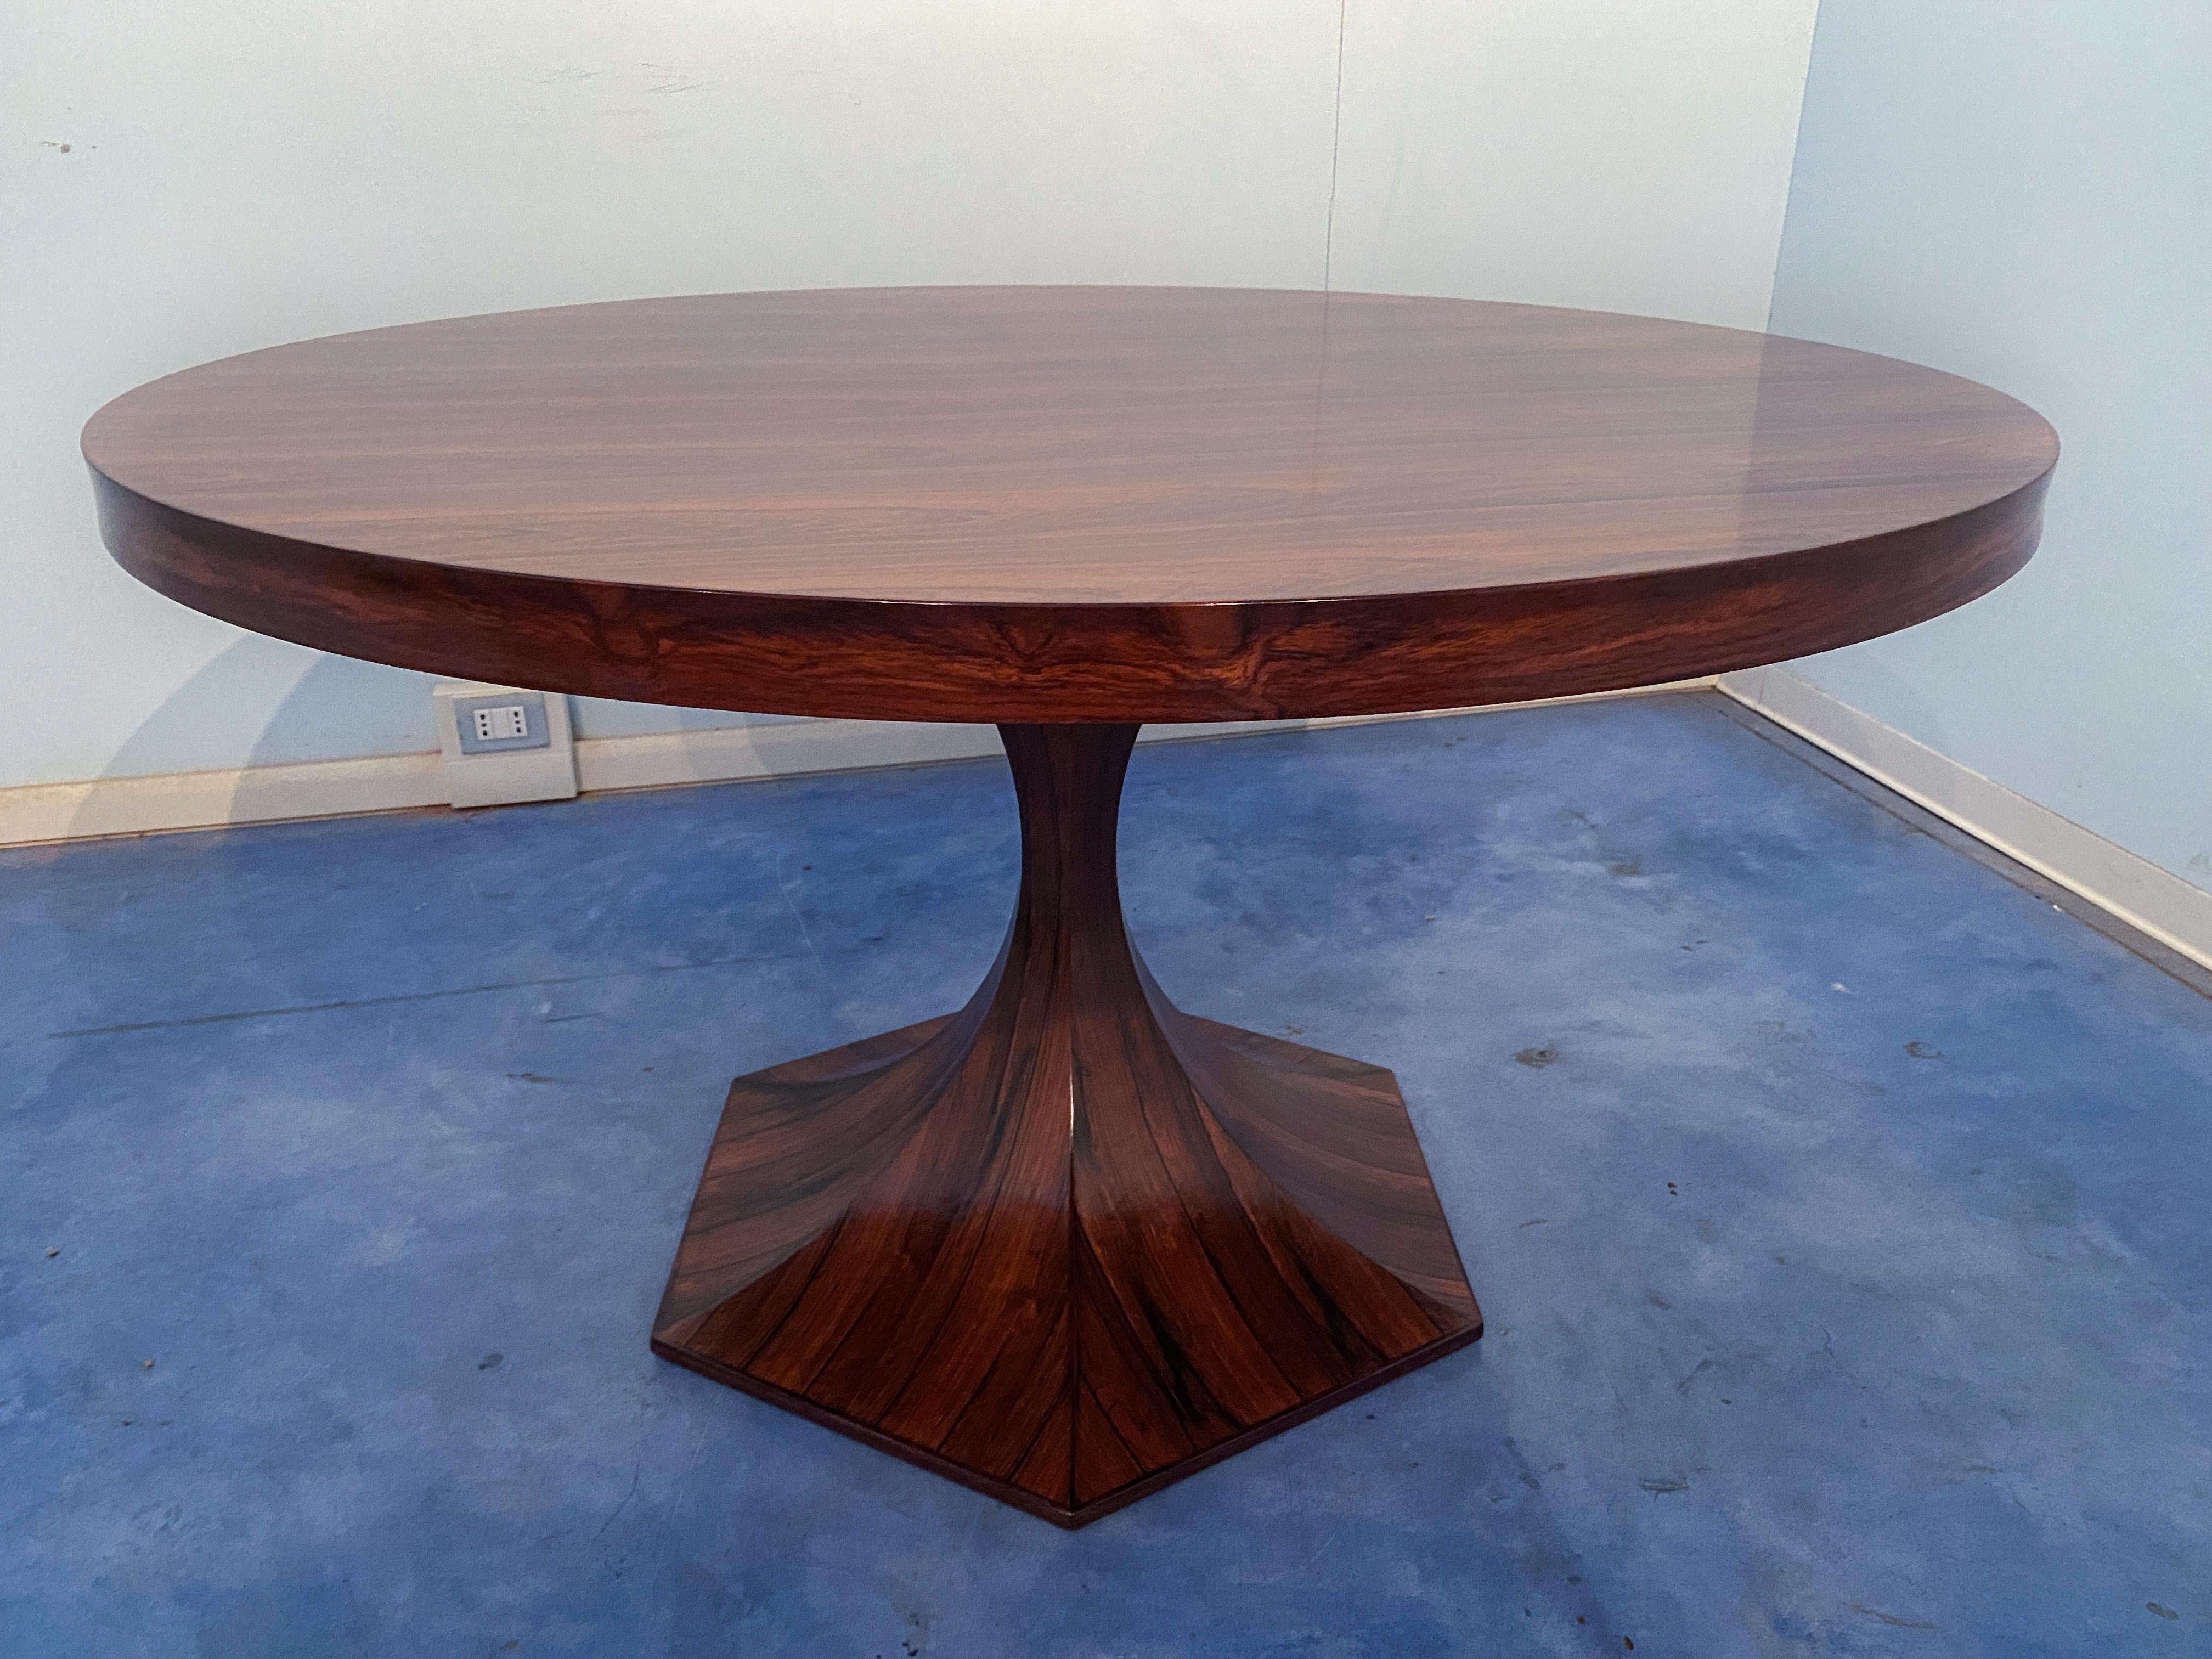 Italian Midcentury Circular Dining Table in Mahogany by Giulio Moscatelli, 1964 For Sale 5